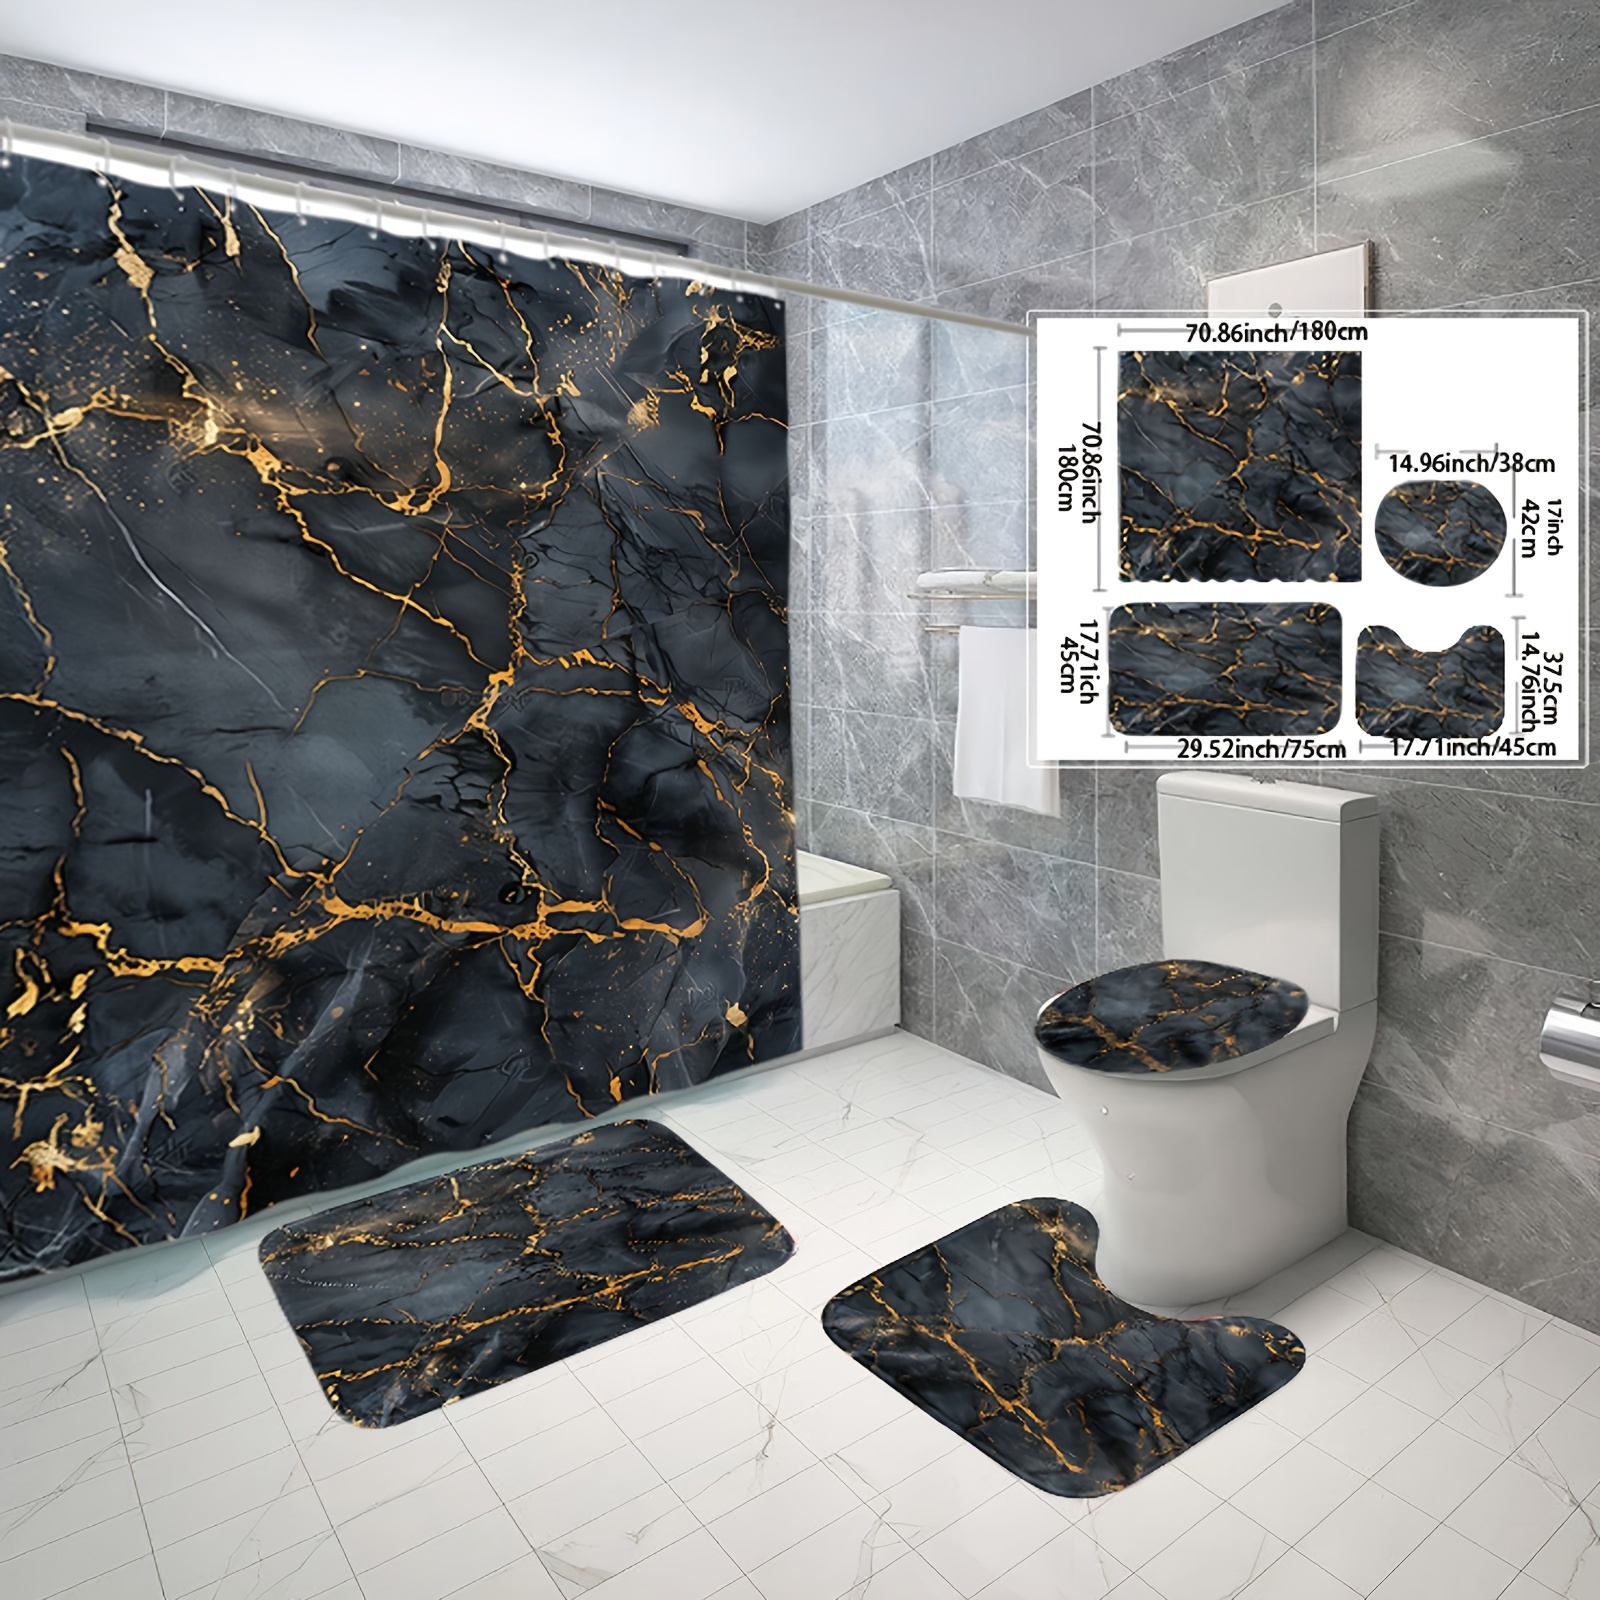 

elegant" Black Gold Marble Shower Curtain Set With Non-slip Bath Mat, U-shaped Rug & Toilet Lid Cover - Waterproof Polyester Fabric, Includes 12 Hooks